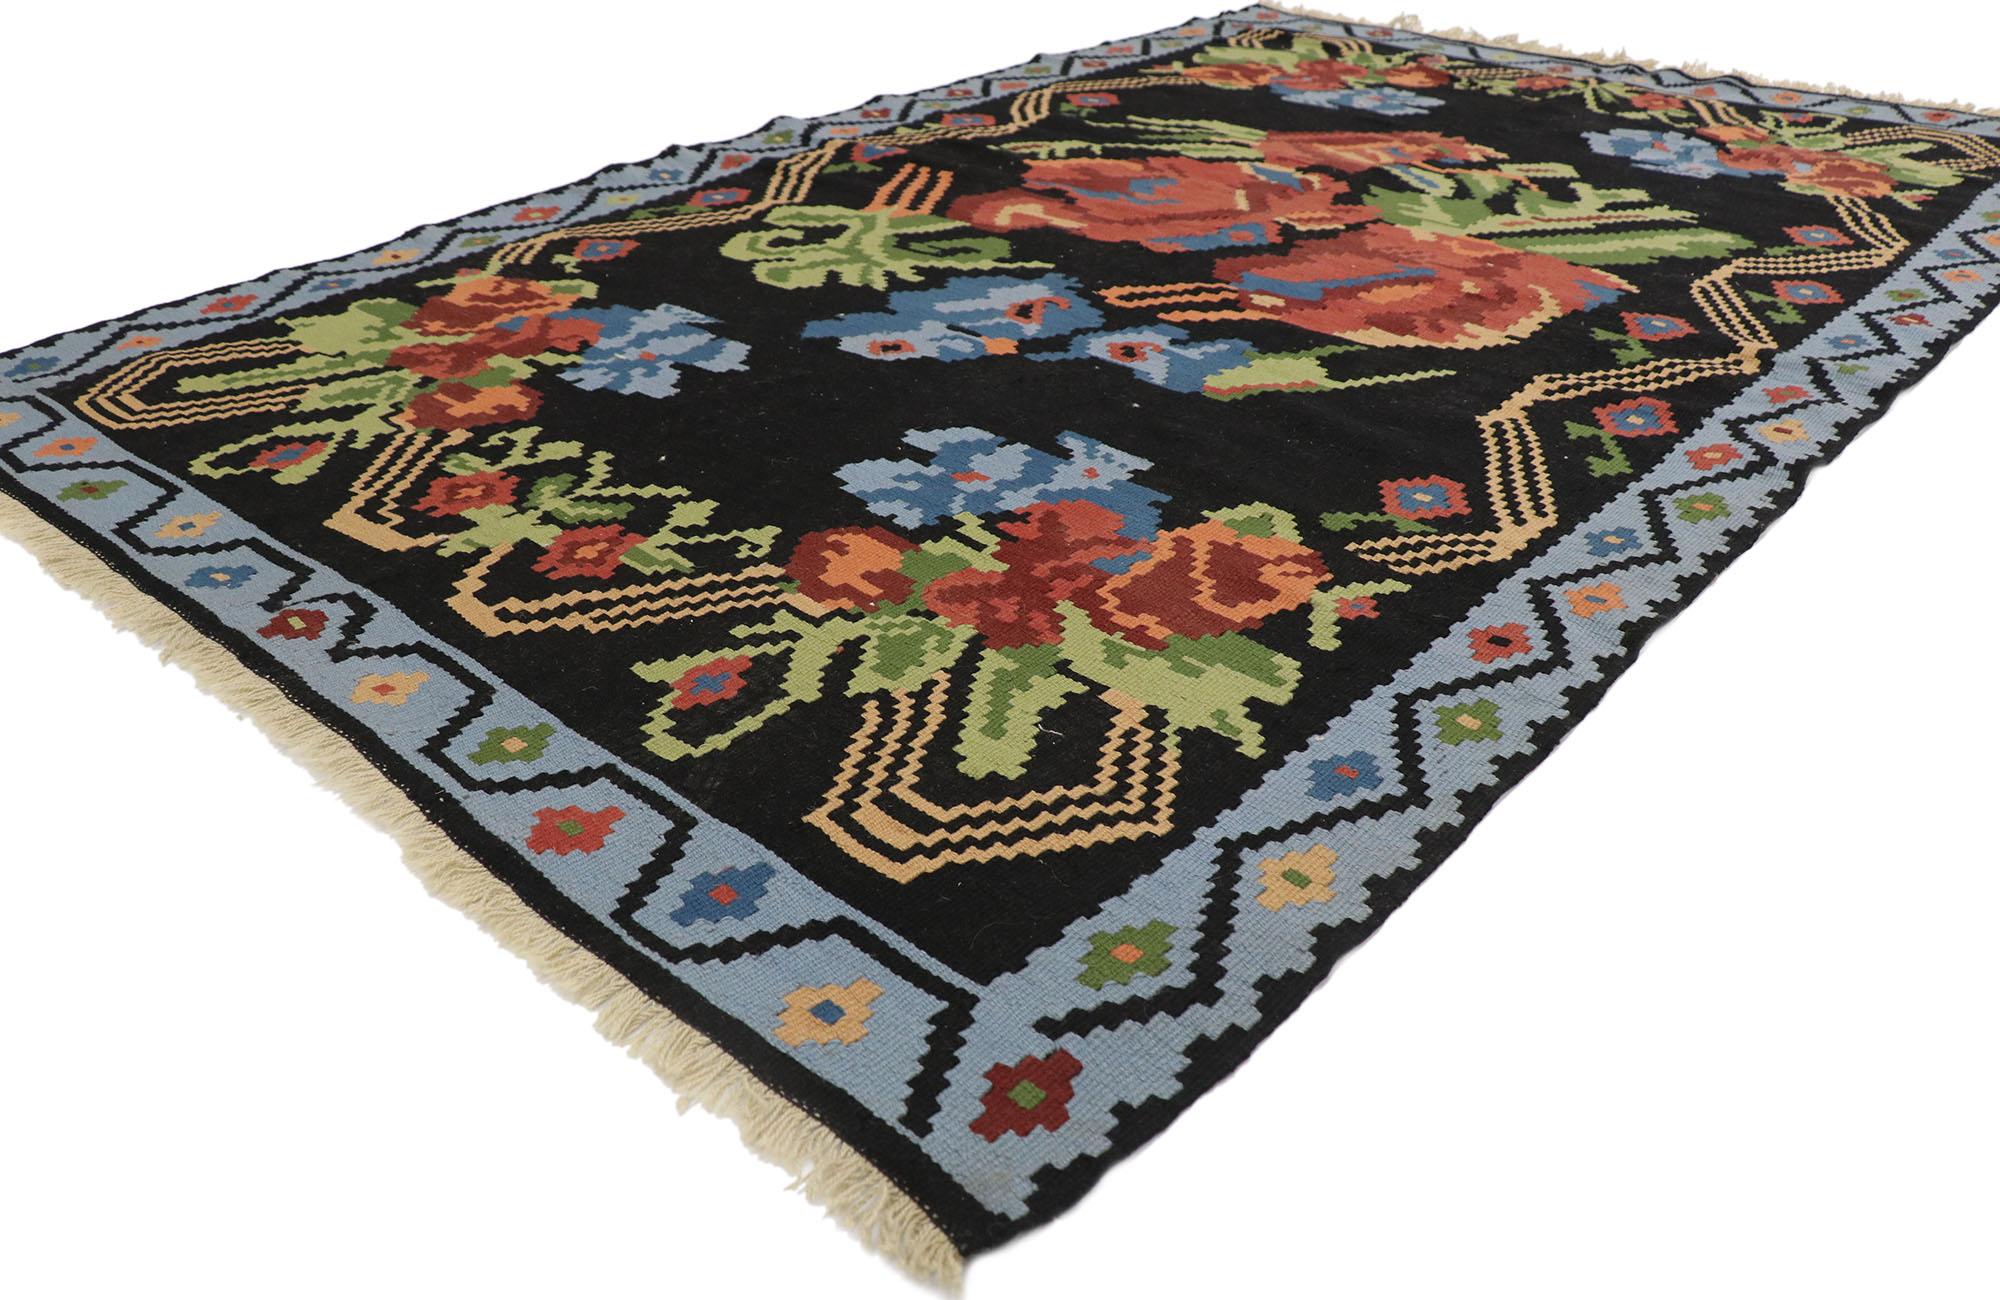 78009 Vintage Turkish Bessarabian Rose Kilim Rug with English Country Chintz Style 05'00 x 07'08. Drawing inspiration from Mario Buatta and romantic Chintz style, this hand-woven floral Turkish kilim rug gives a lively and light hearted feel with